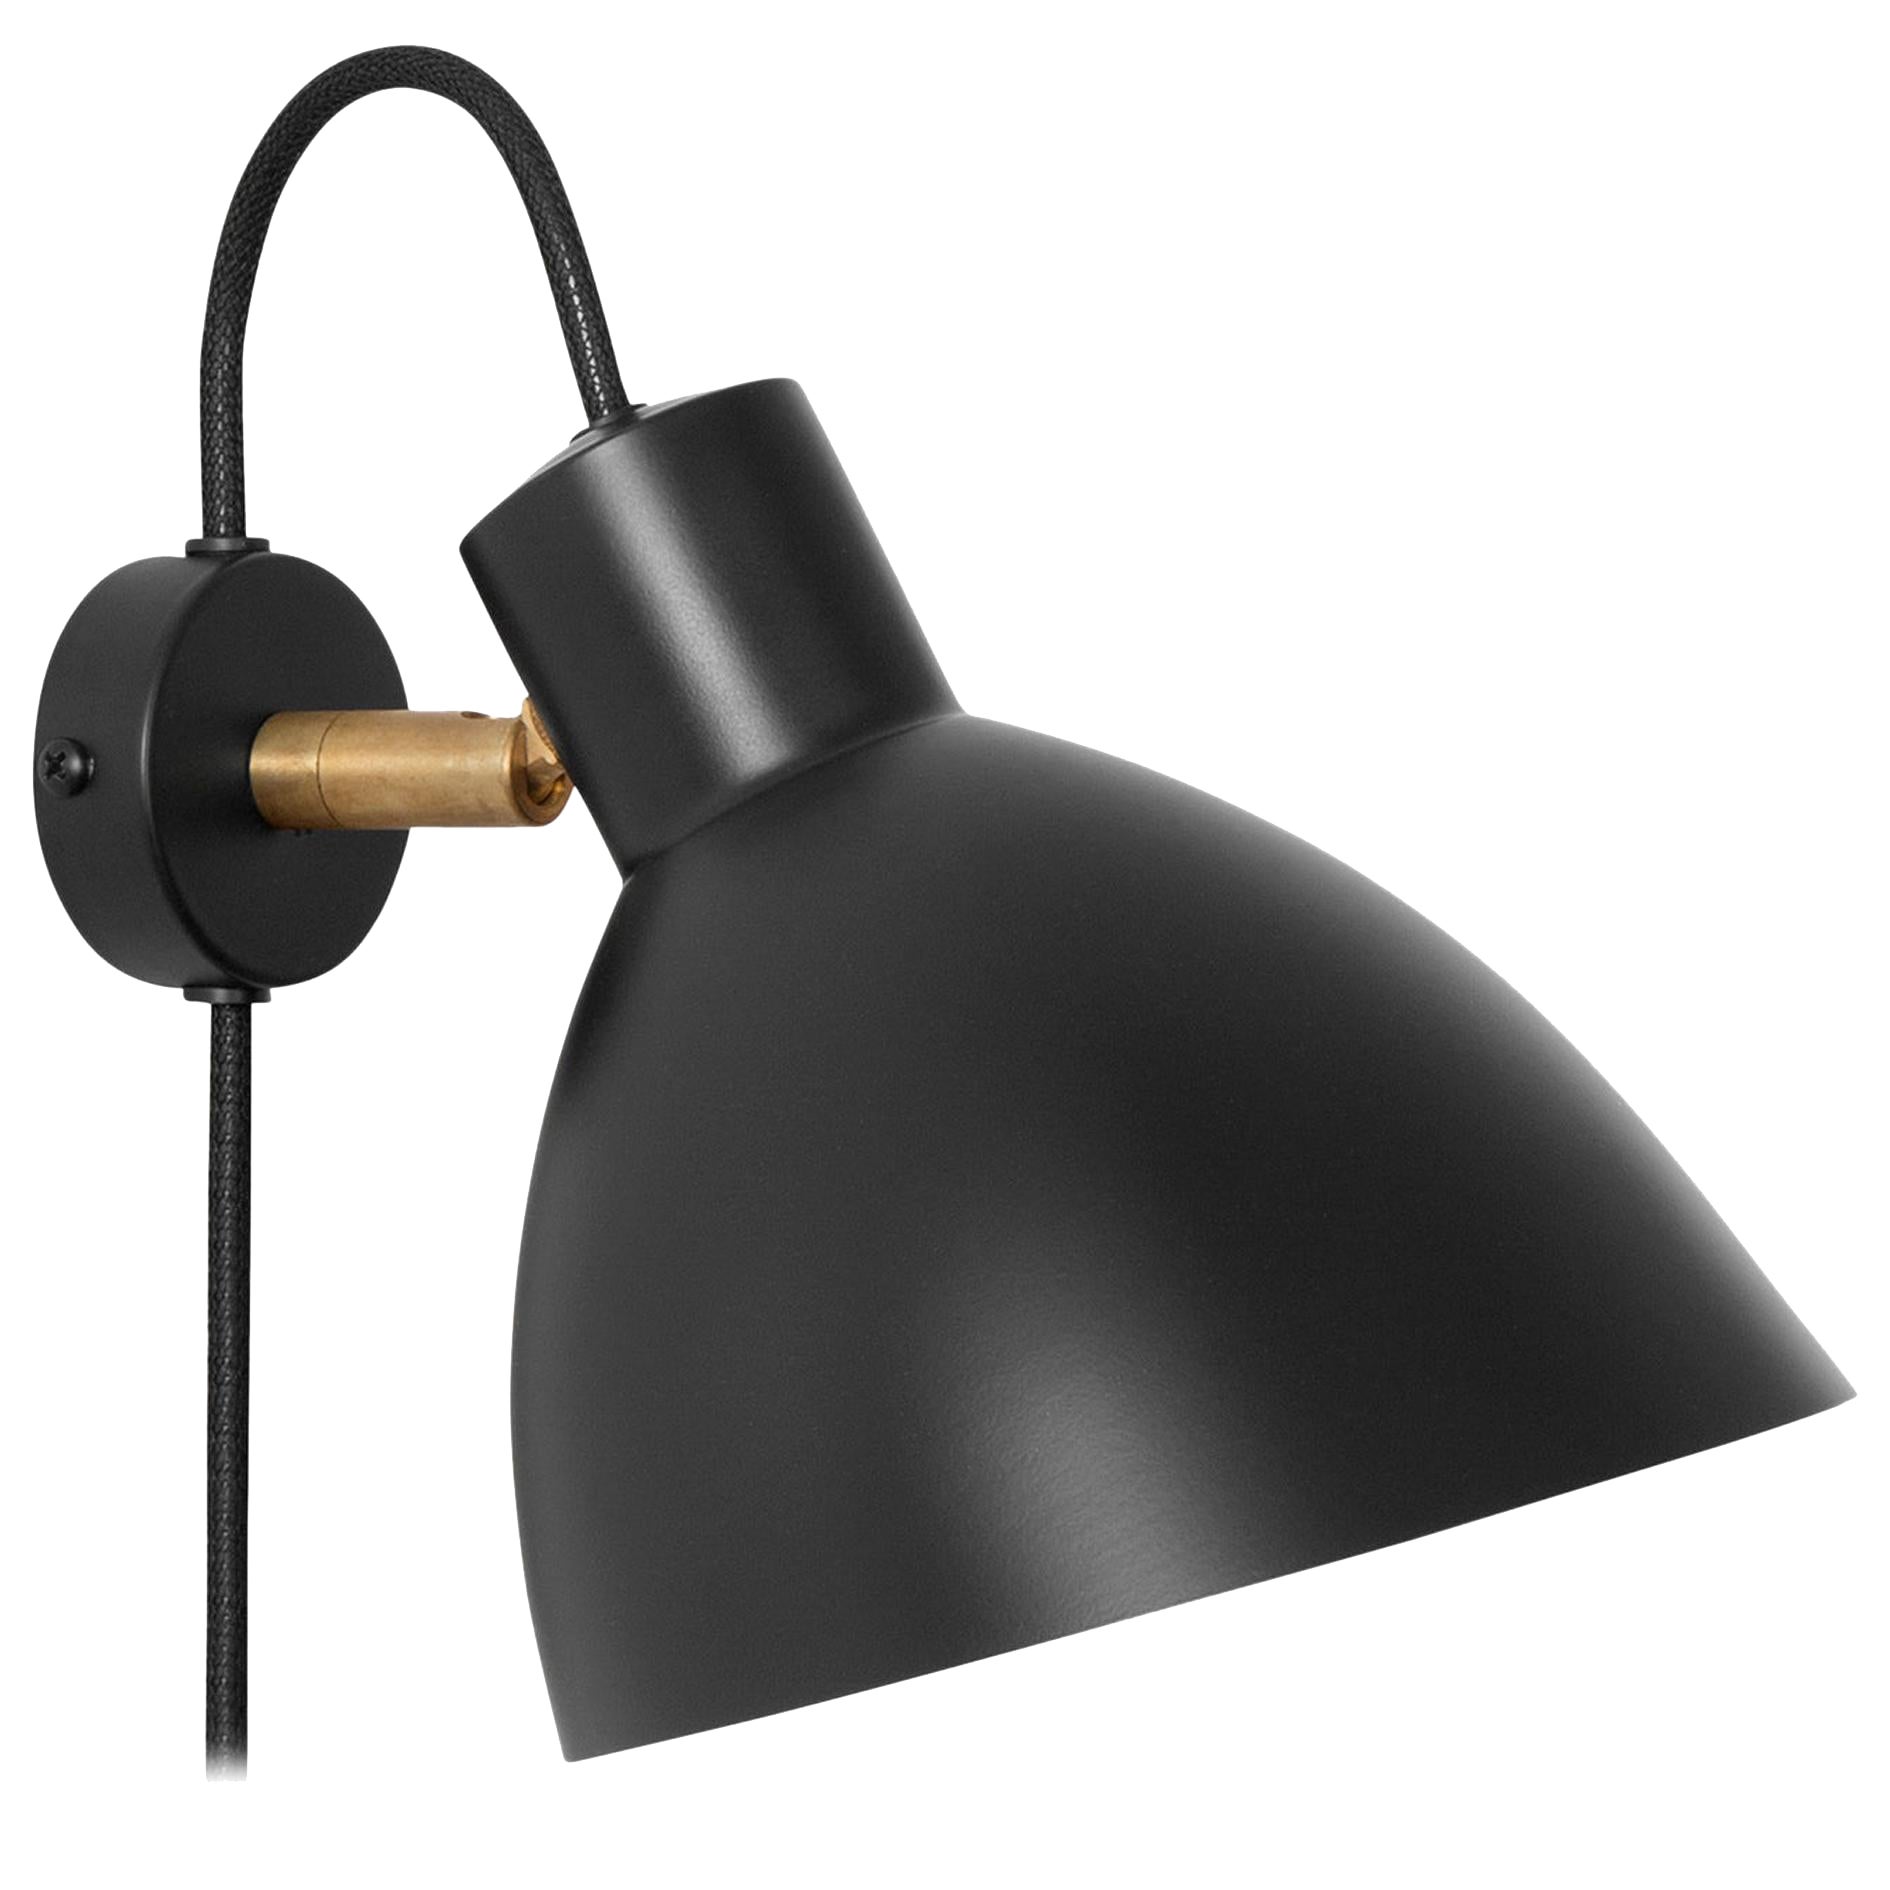 Sabina Grubbeson KH#1 Black Wall Lamp by Konsthantverk For Sale at 1stDibs